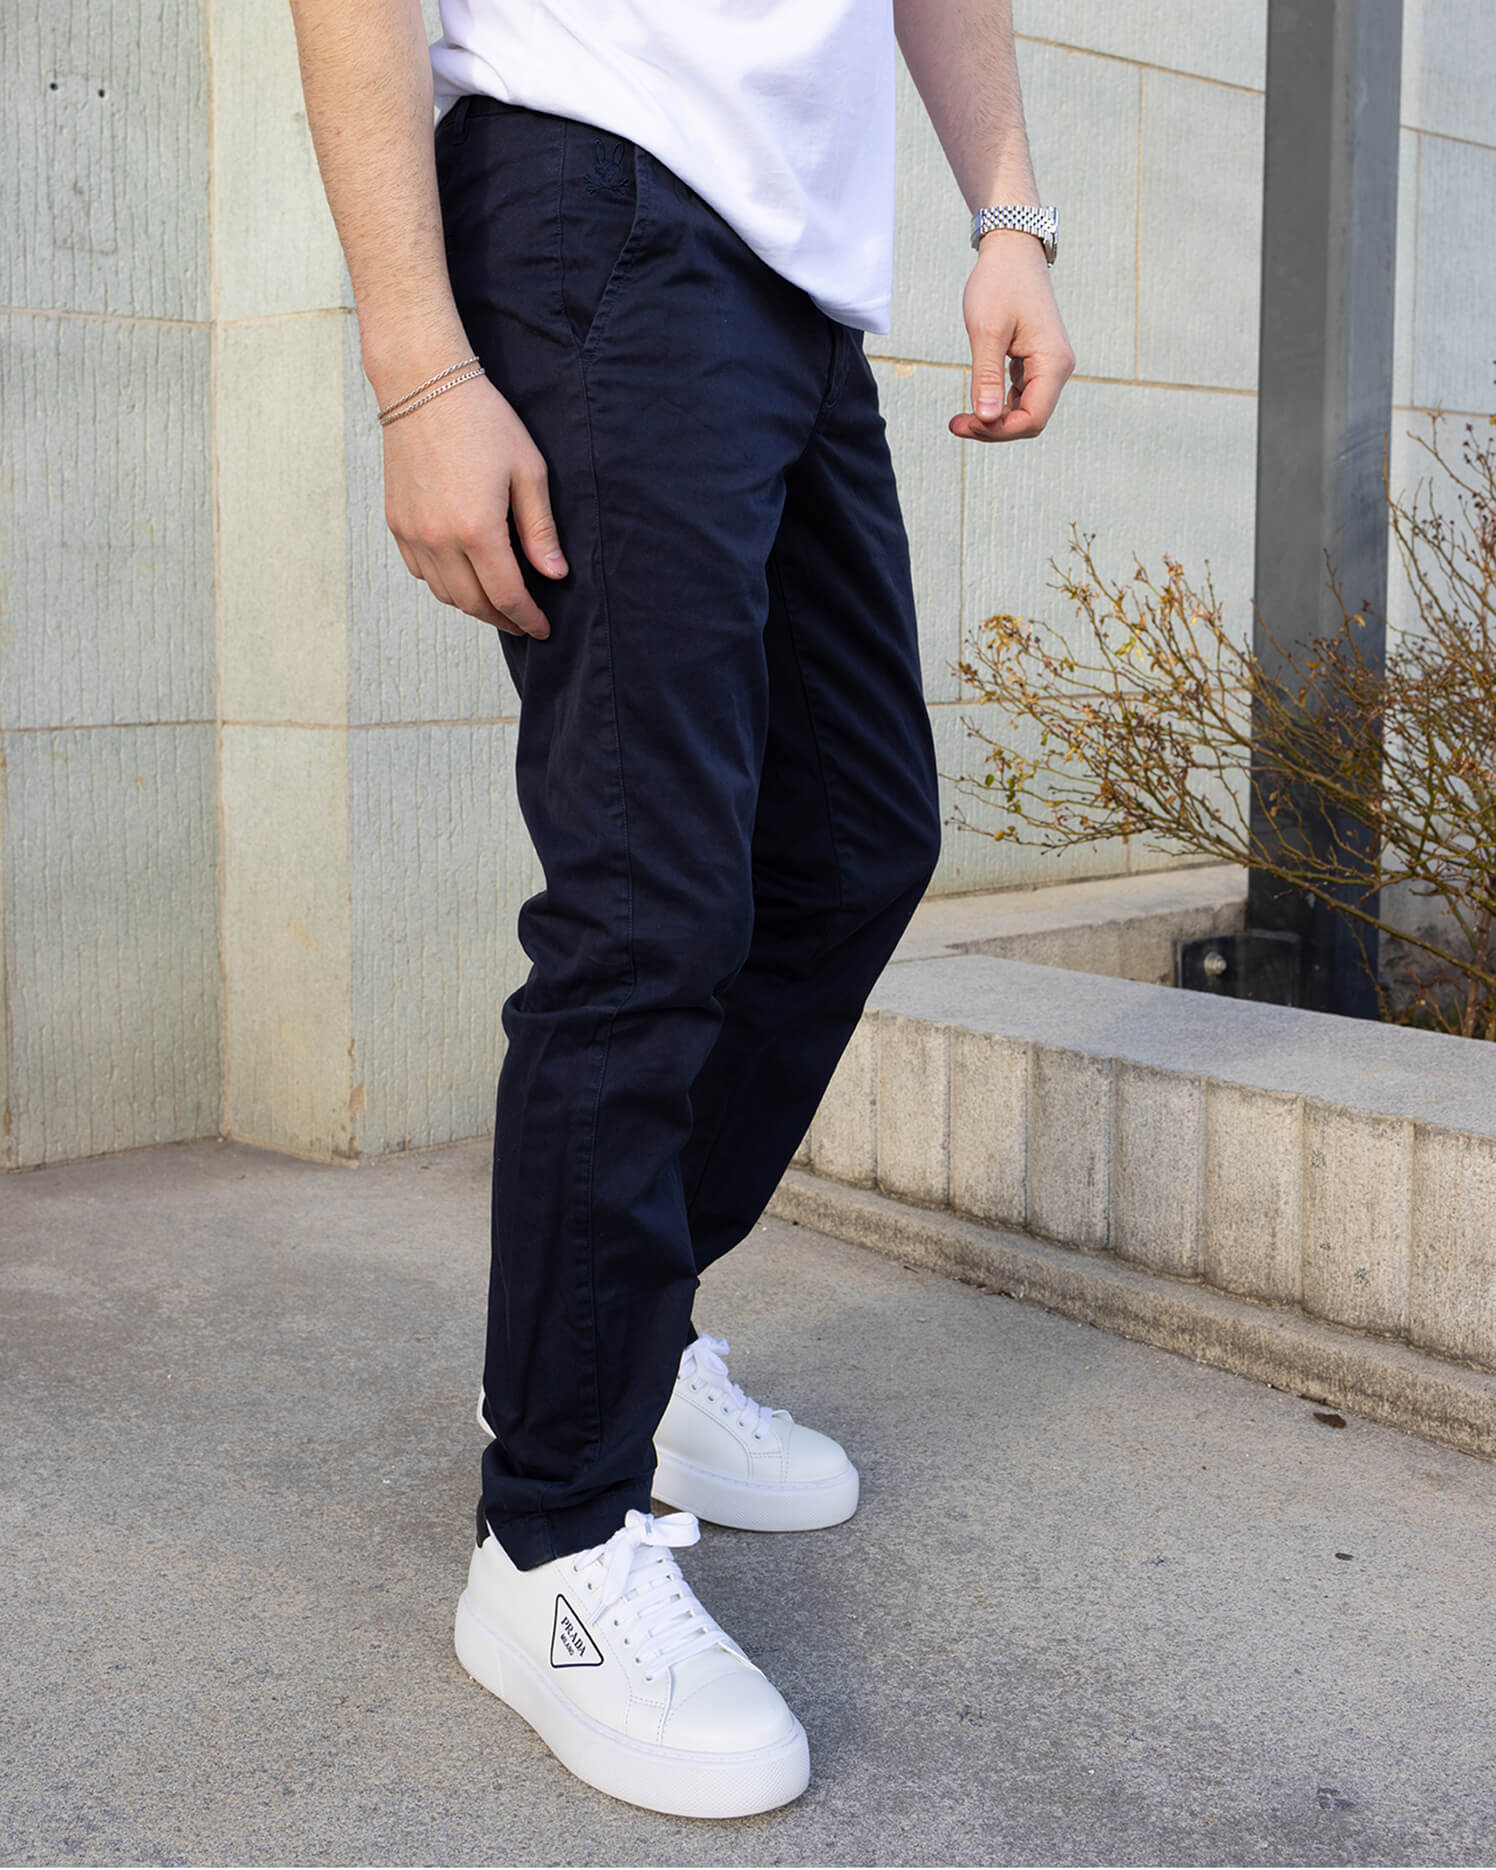 How to wear black chinos  3 outfit ideas  combinations for men